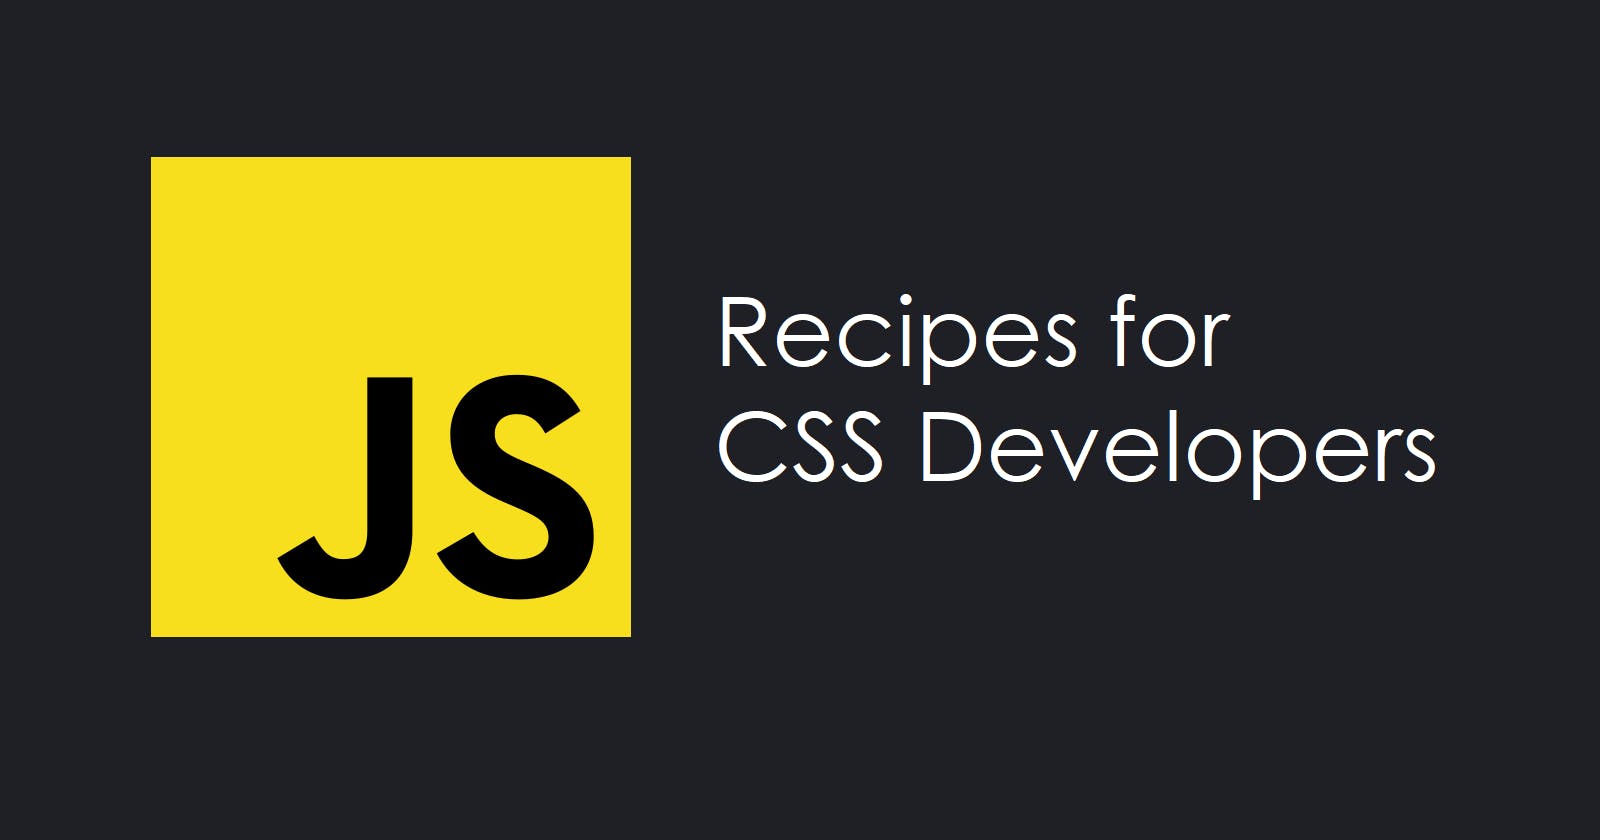 Common JavaScript recipes for CSS developers and designers